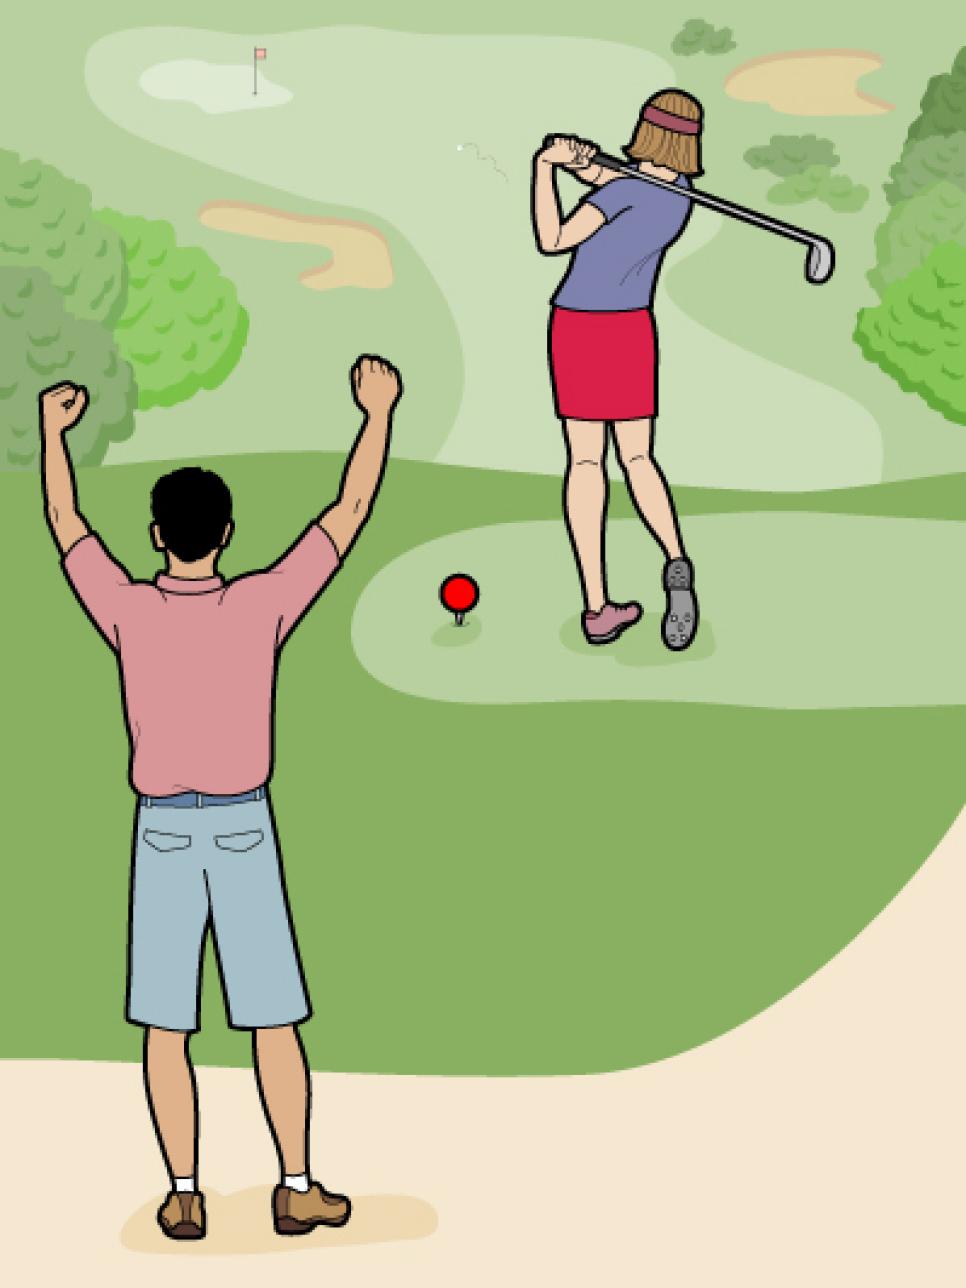 /content/dam/images/golfdigest/fullset/2020/07/how_to_play_with_your_spouse_final1.jpg